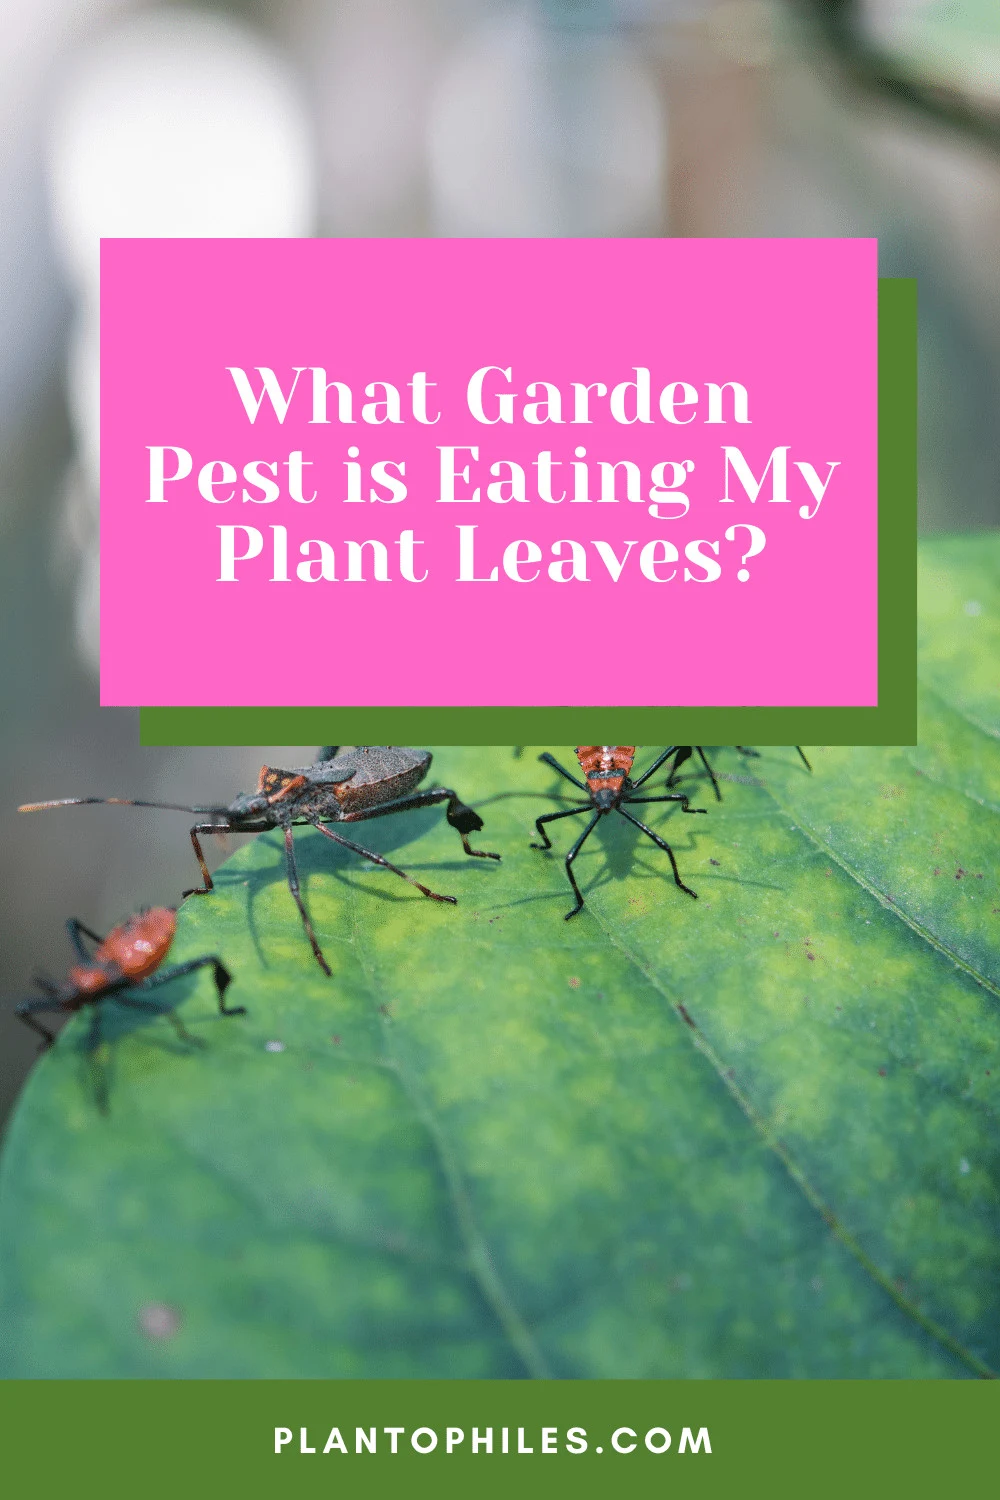 What Garden Pest is Eating My Plant Leaves